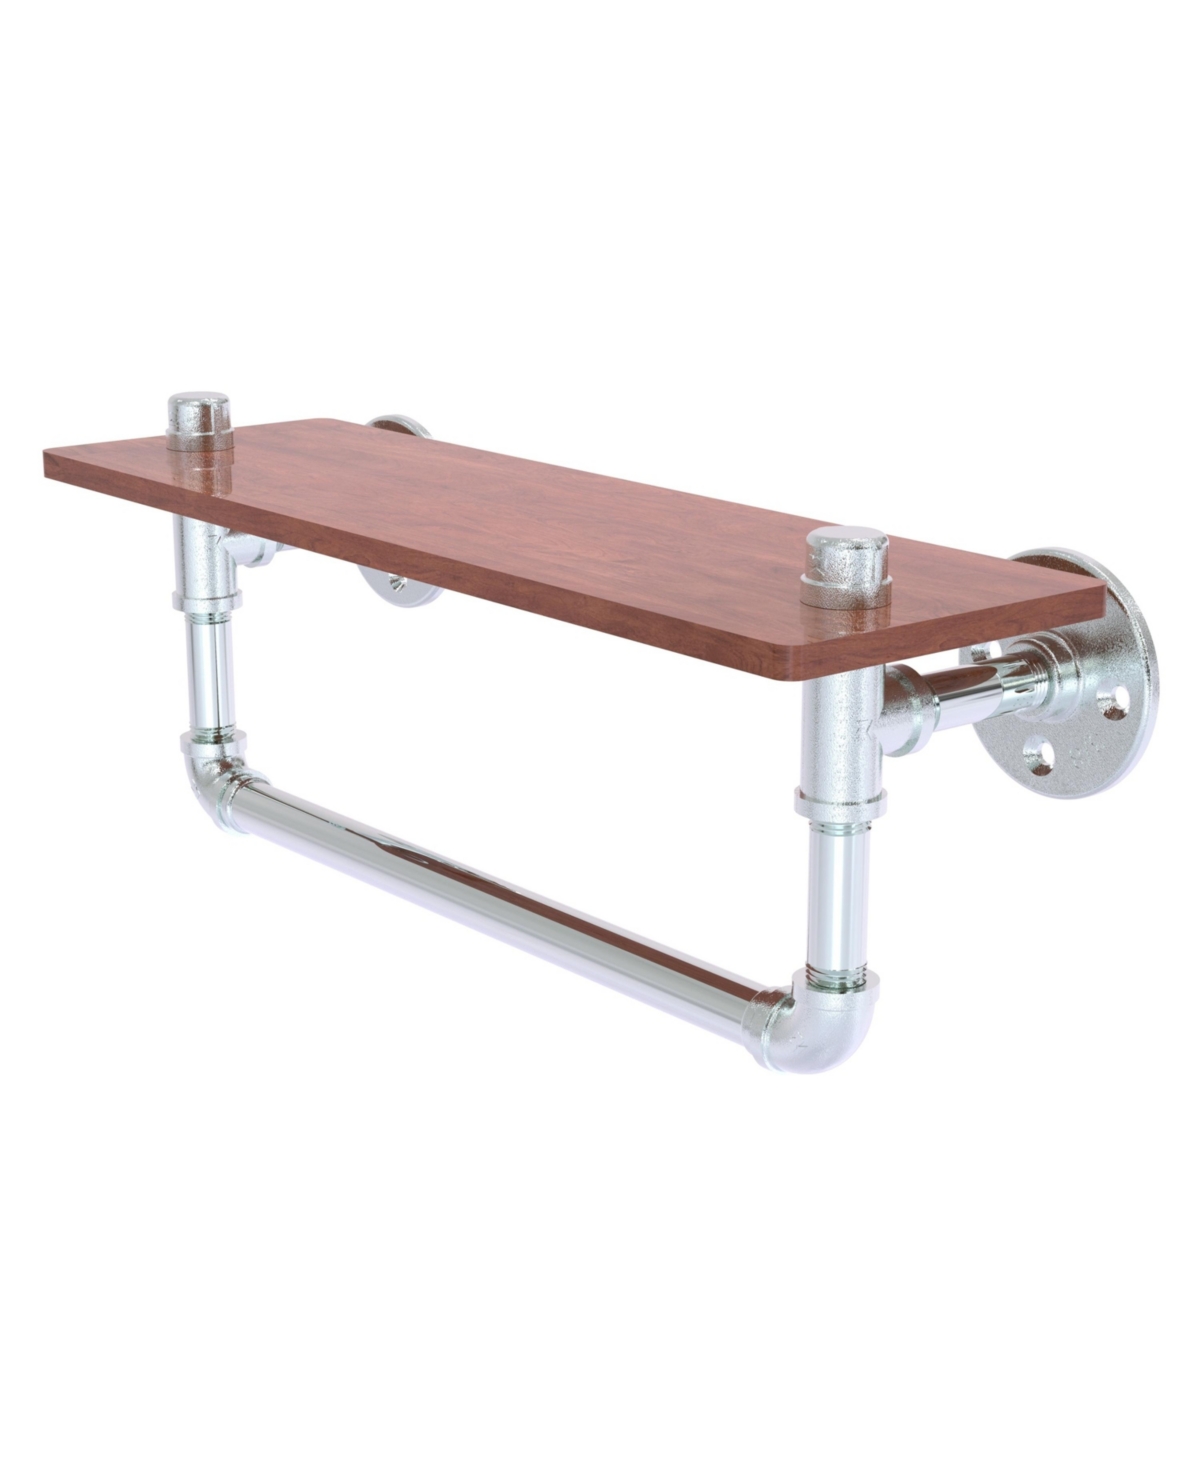 ALLIED BRASS PIPELINE COLLECTION 16 INCH IRONWOOD SHELF WITH TOWEL BAR